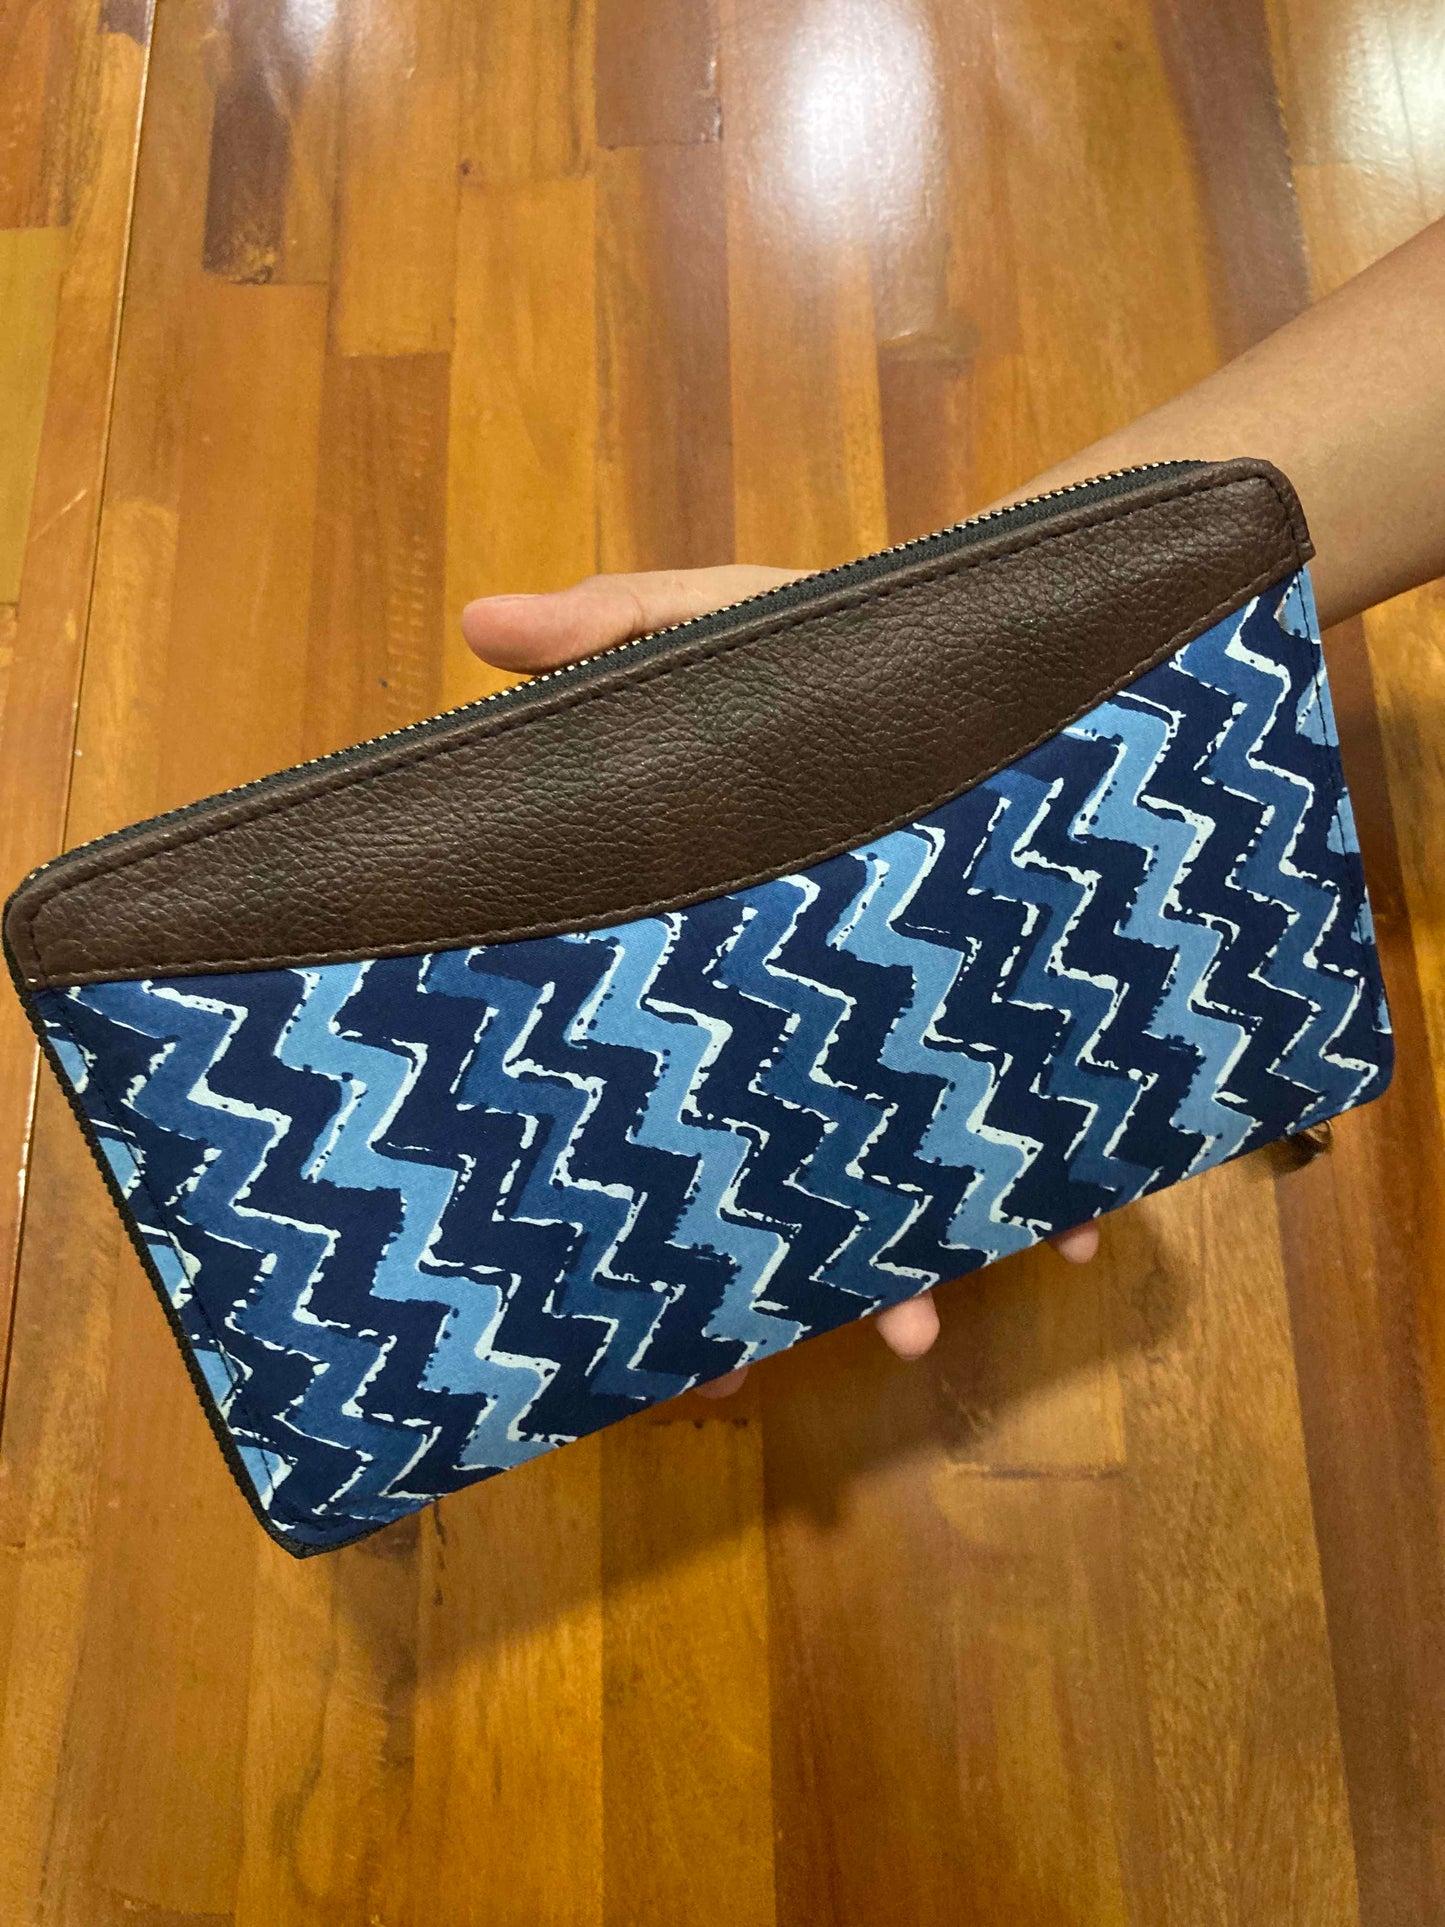 Southloom™ Handmade Purse with Blue Jacquard Cloth and Leatherette